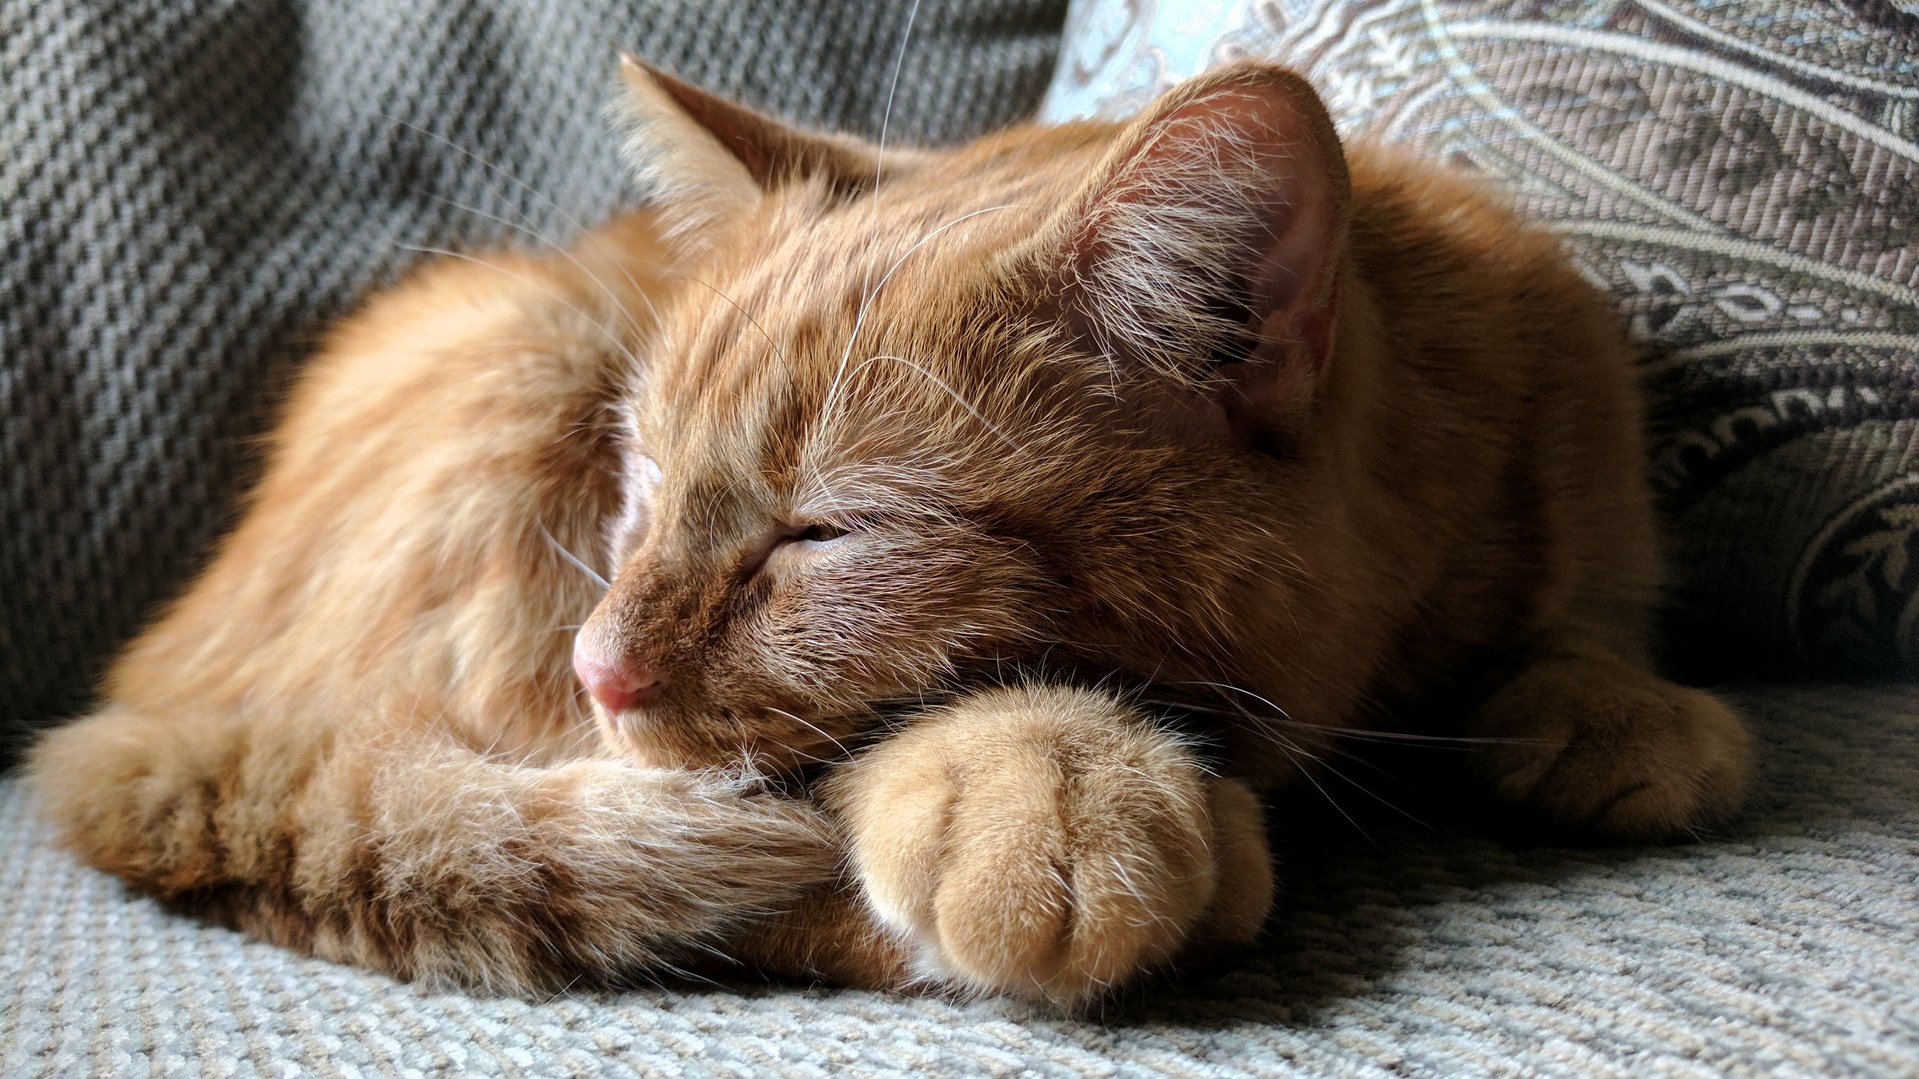 The pixel sure does take some pretty cat photos